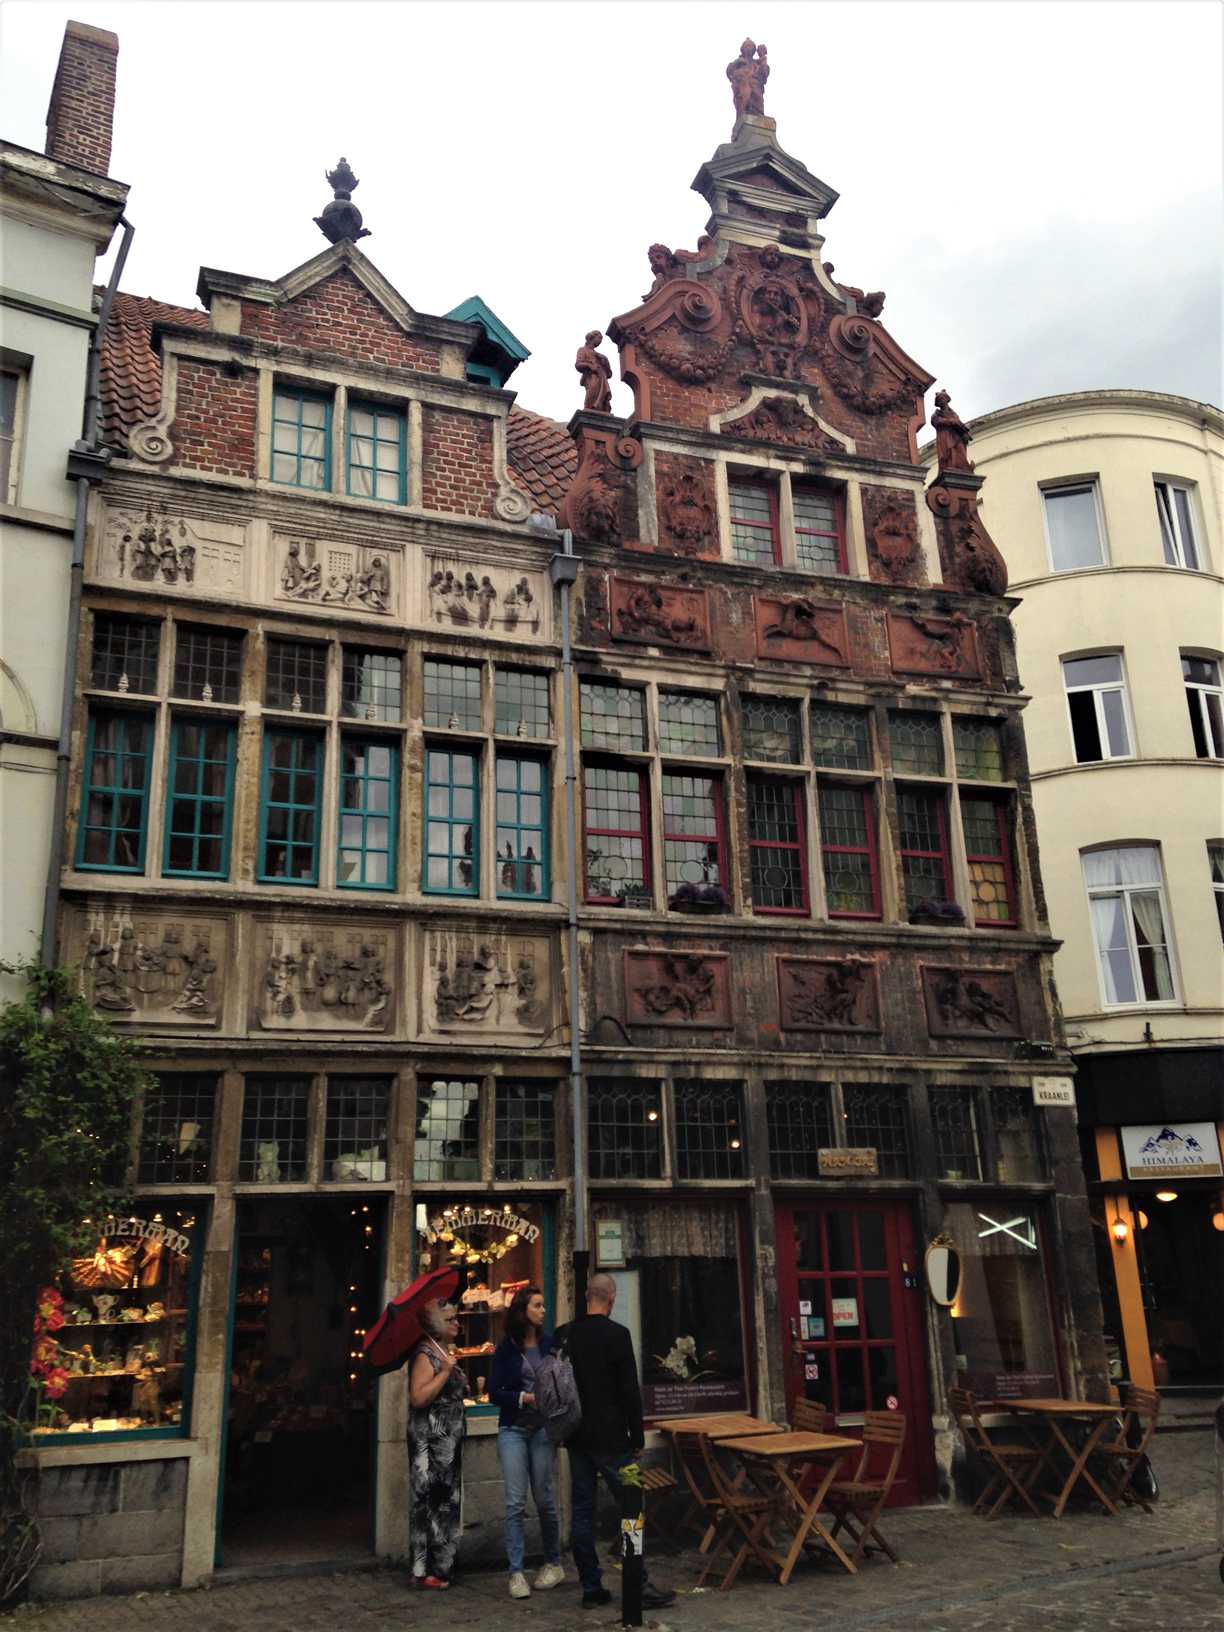 A picture of a unique brick building in Ghent, Belgium with stone carvings on the facade and gables. Tables and chairs are outside of the building, which is on a cobblestone street.